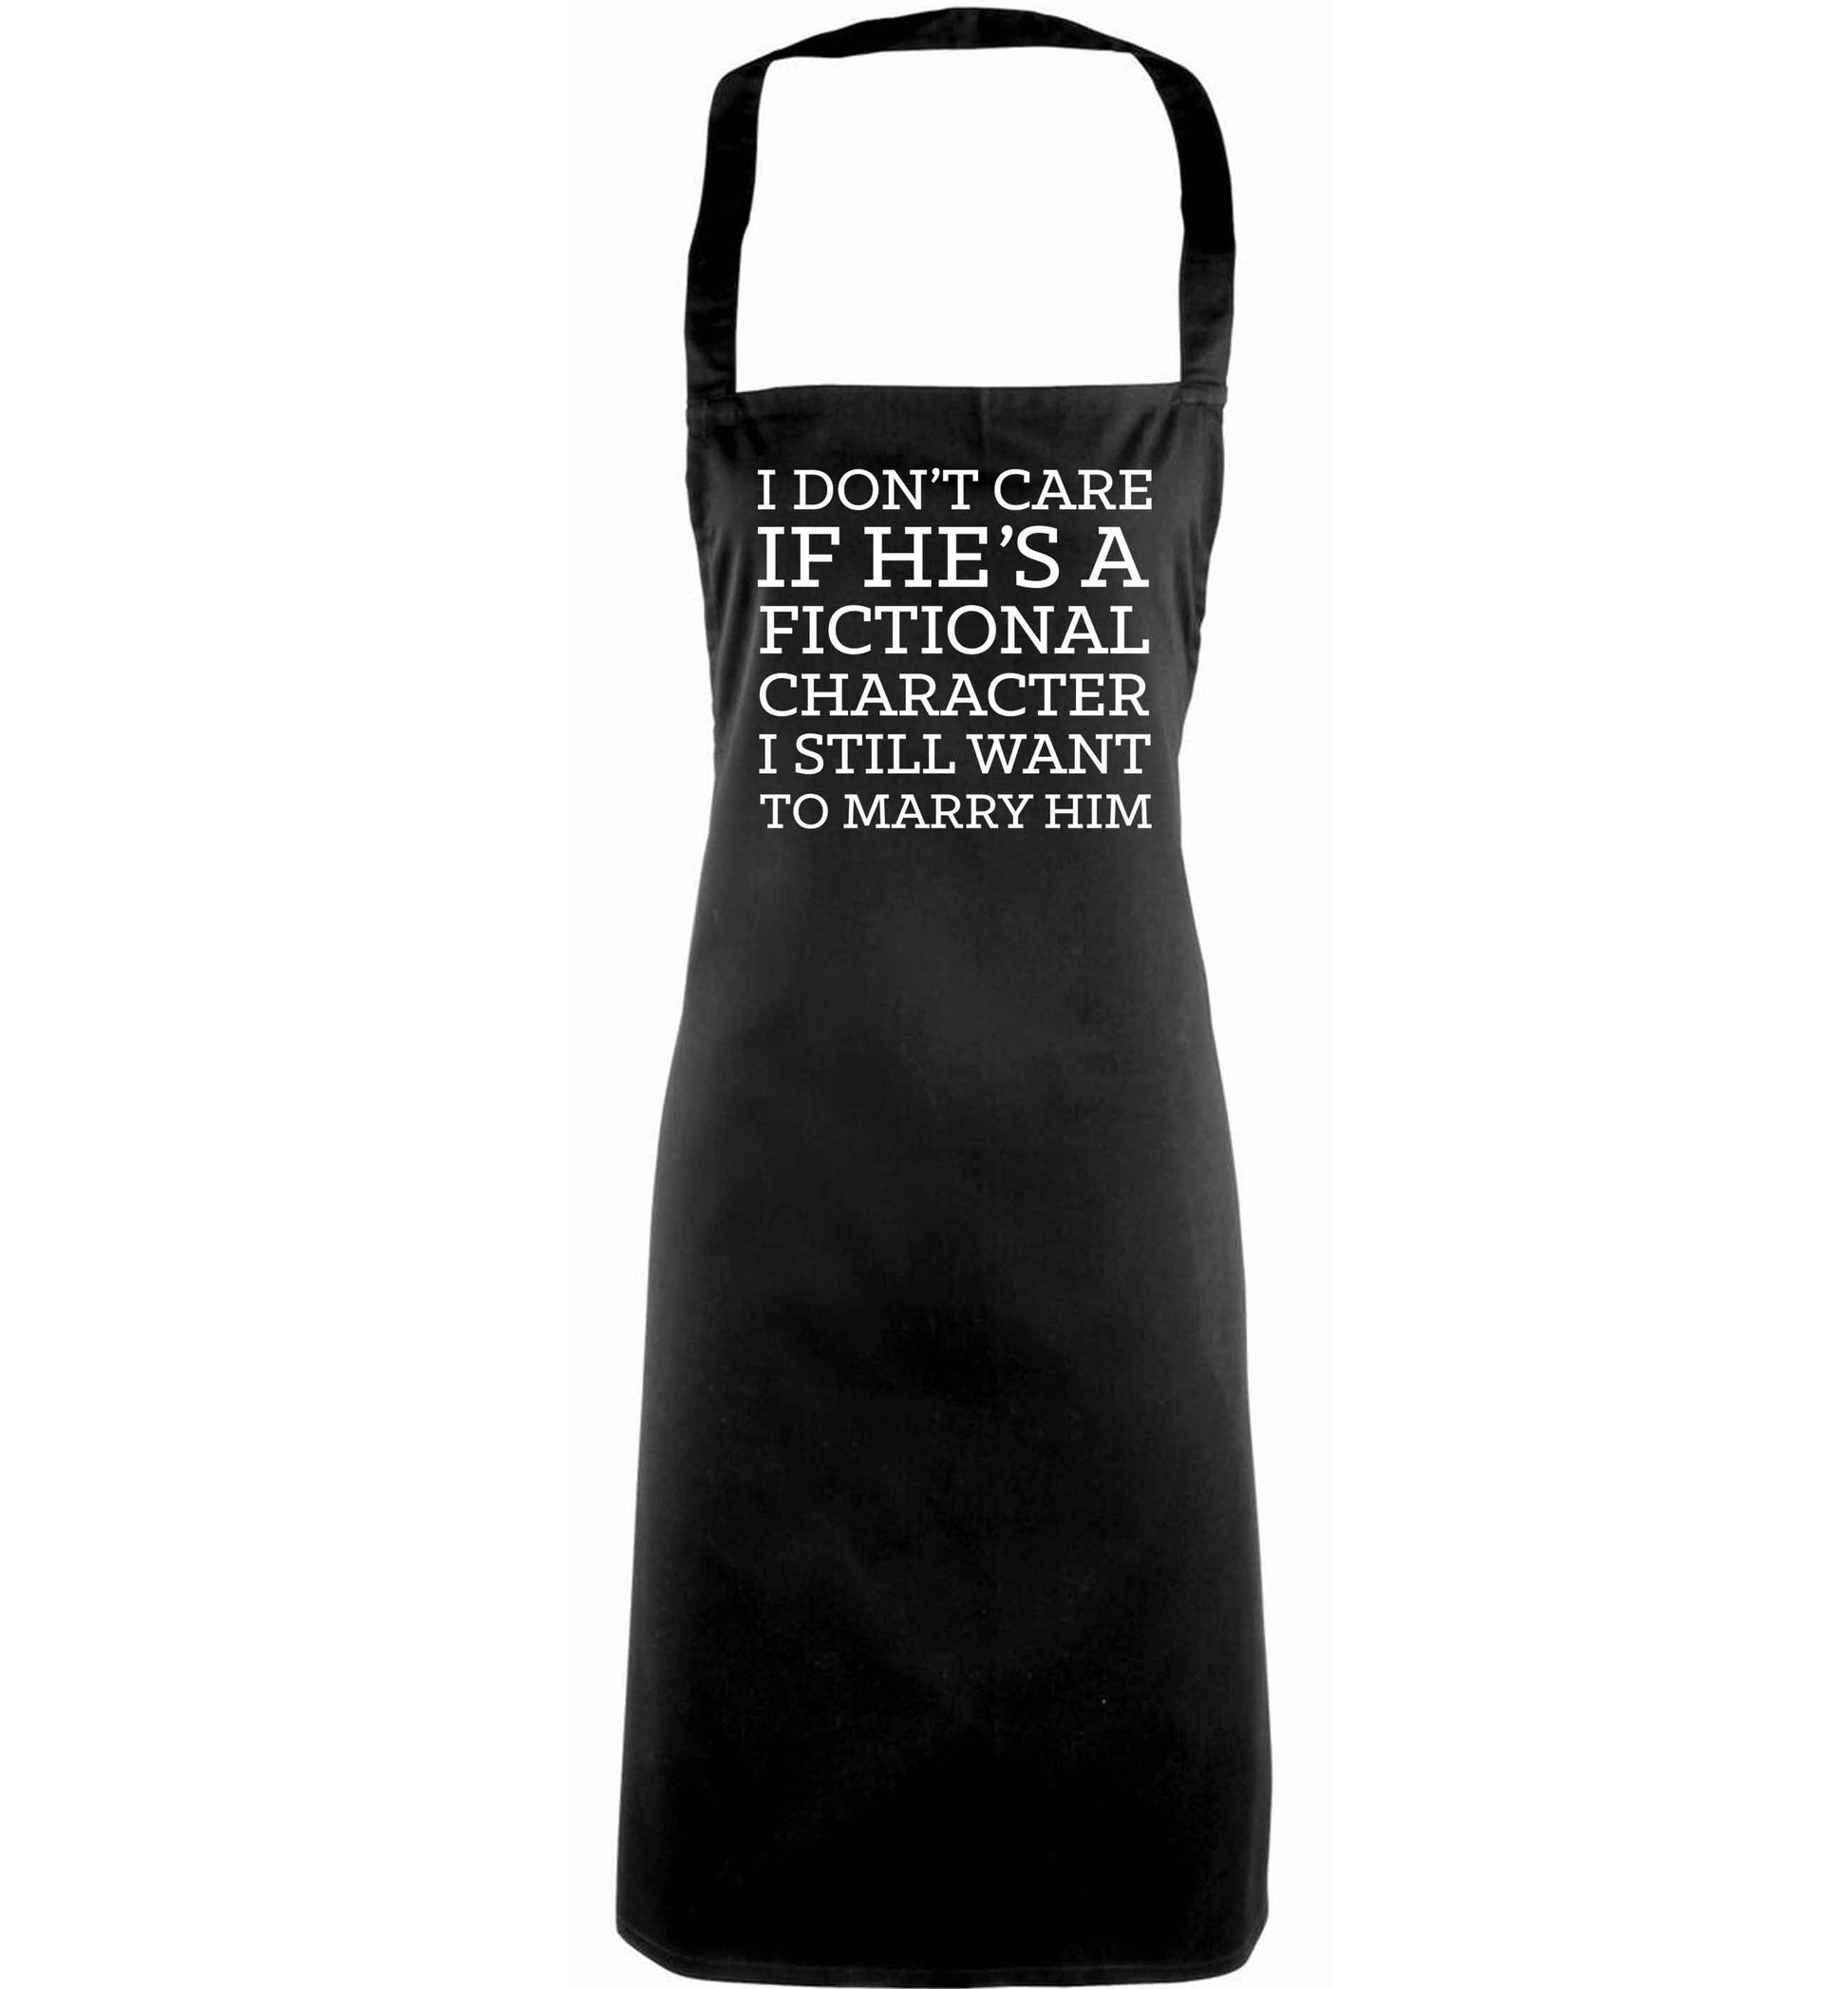 I don't care if he's a fictional character I still want to marry him adults black apron